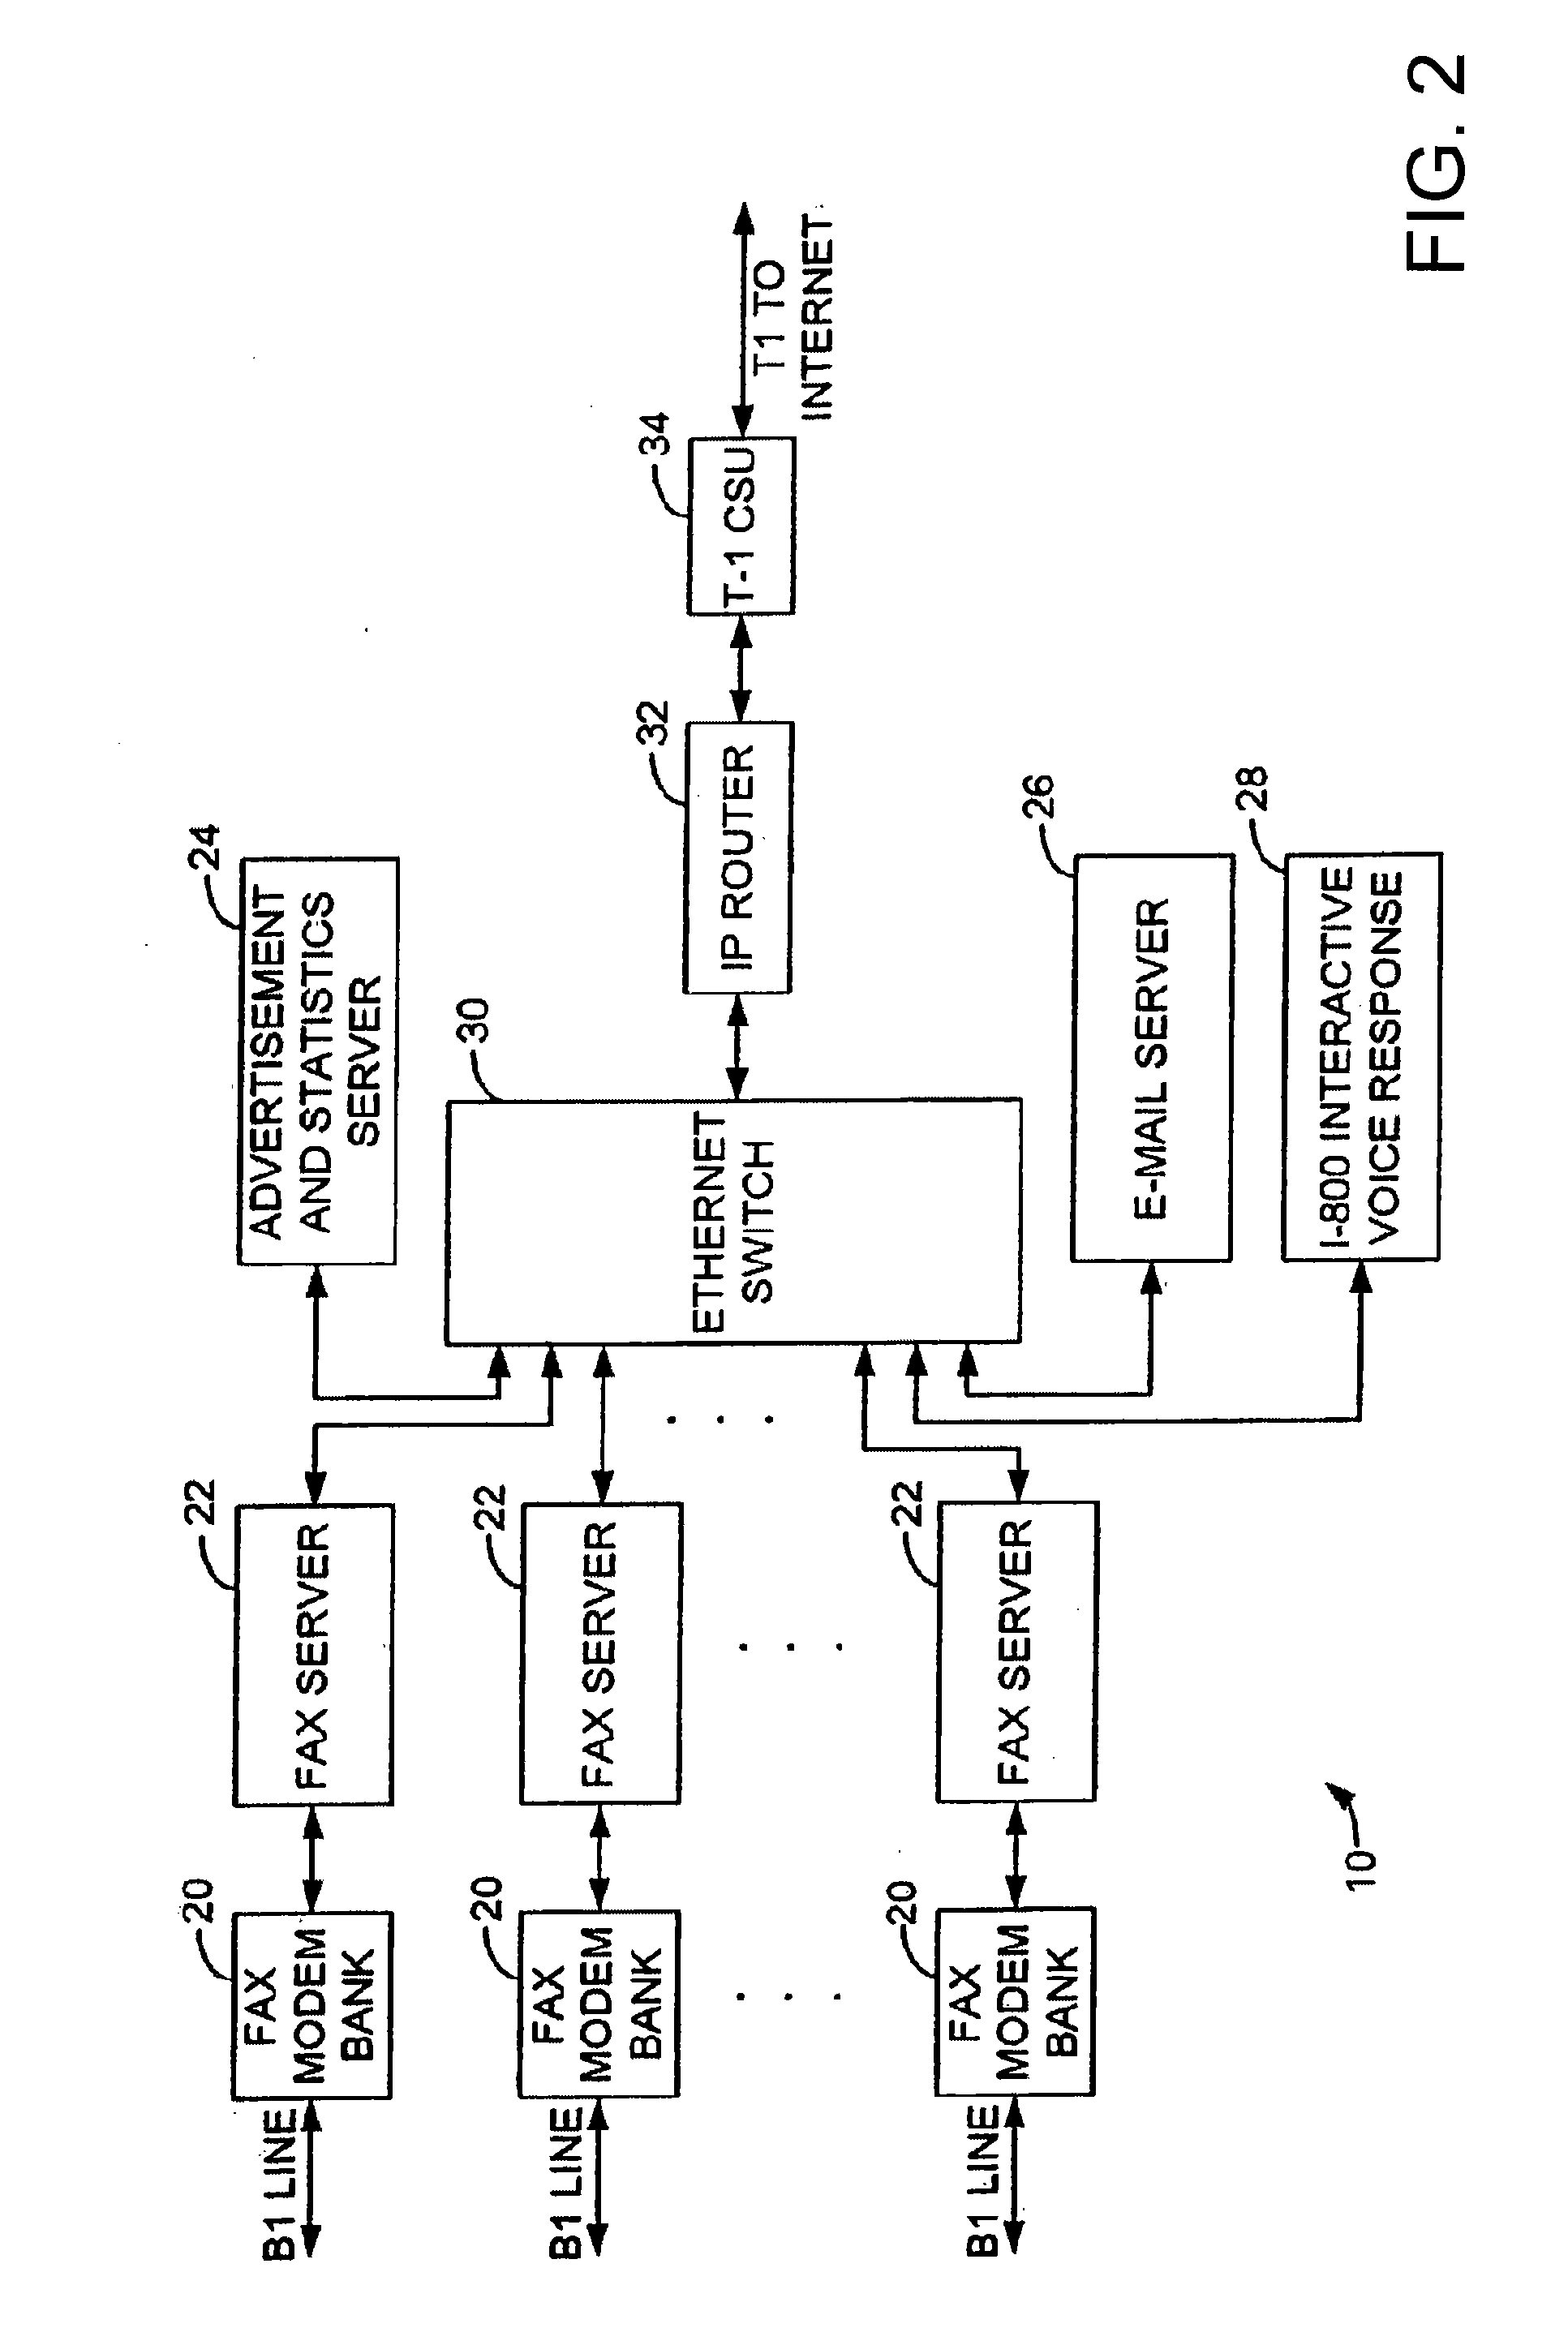 Methods and apparatus for facilitating facsimile transmissions to electronic storage destinations